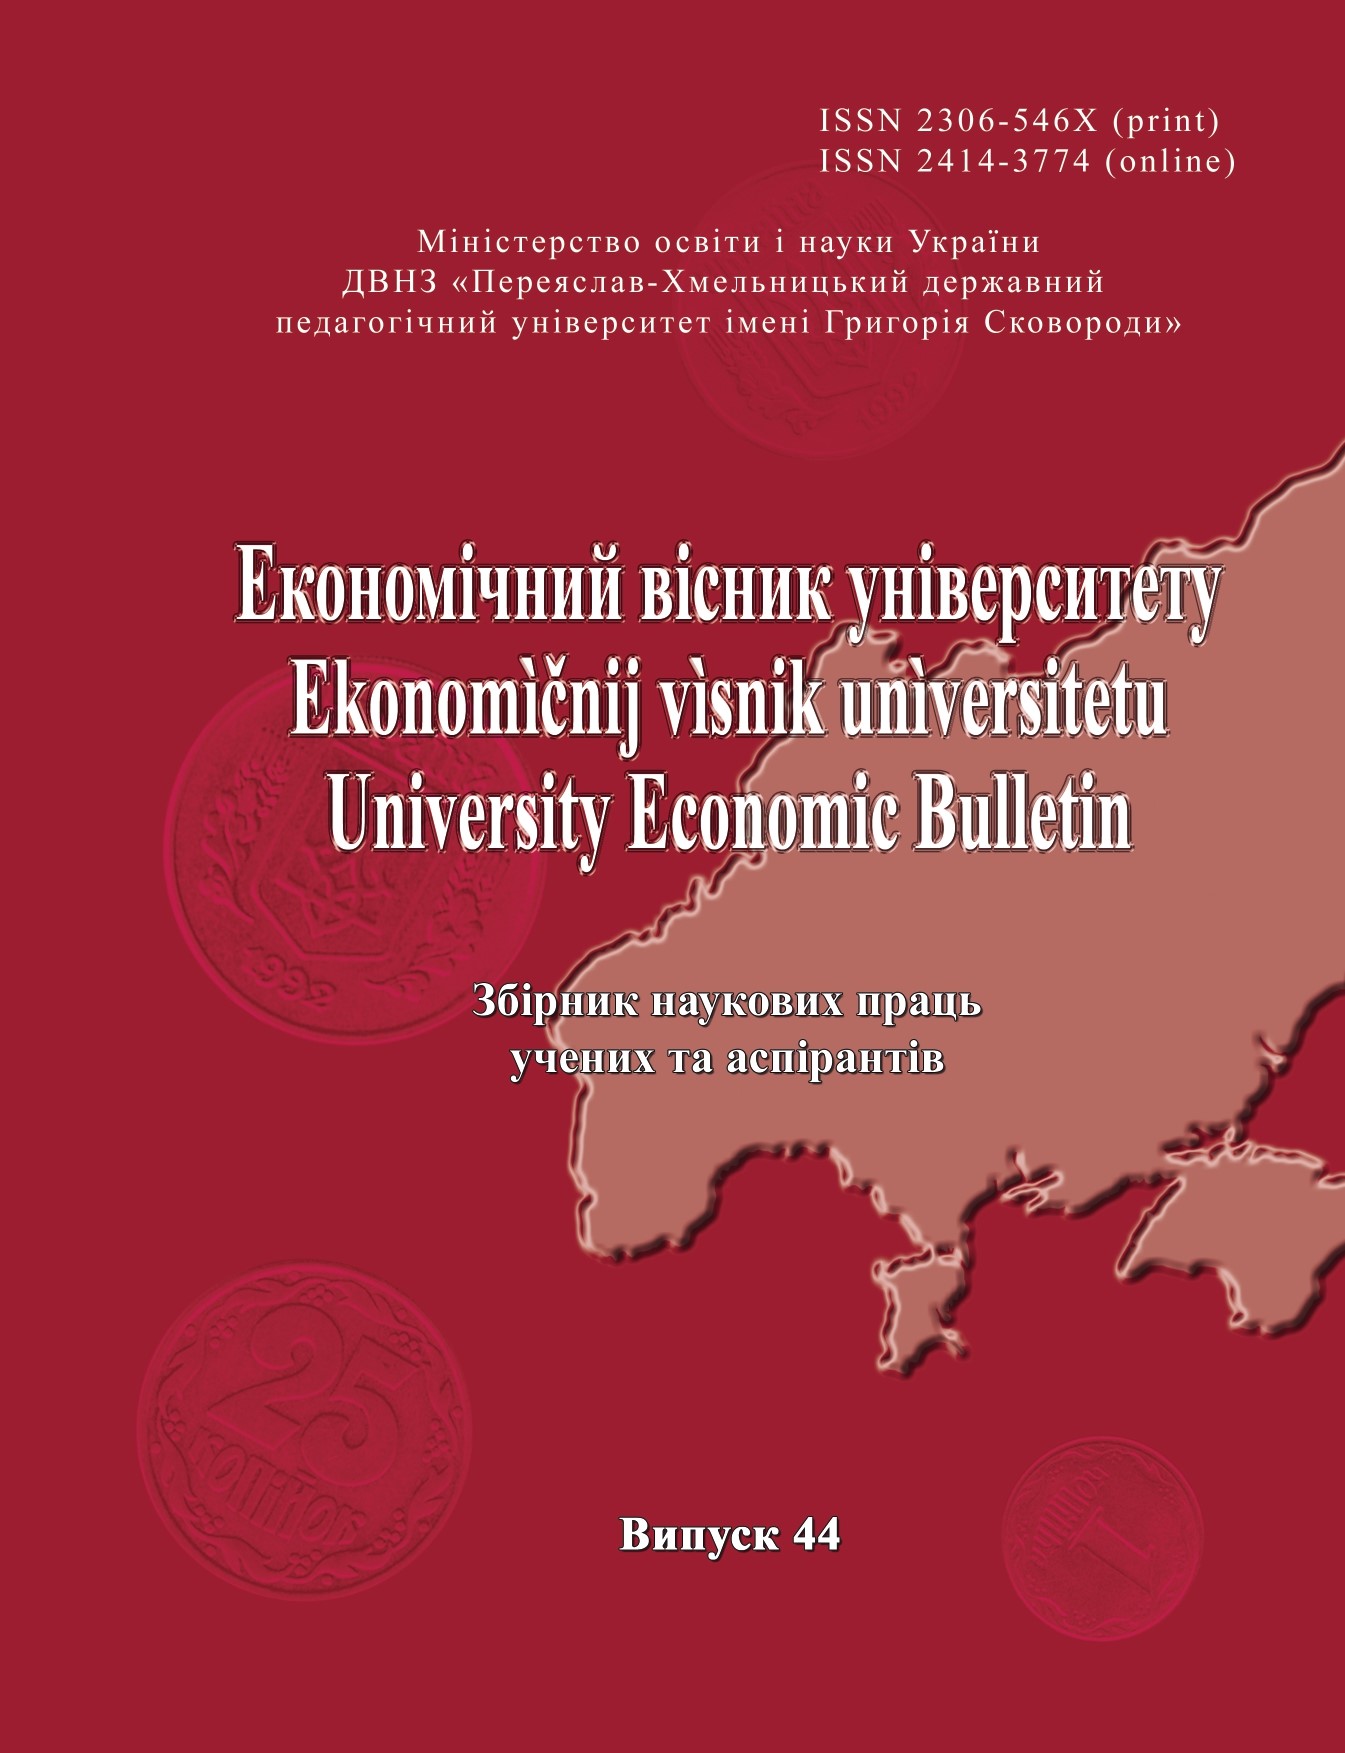 Historical and economic analysis of cooperation between the International Monetary Fund and Ukraine in the context of modern challenges Cover Image